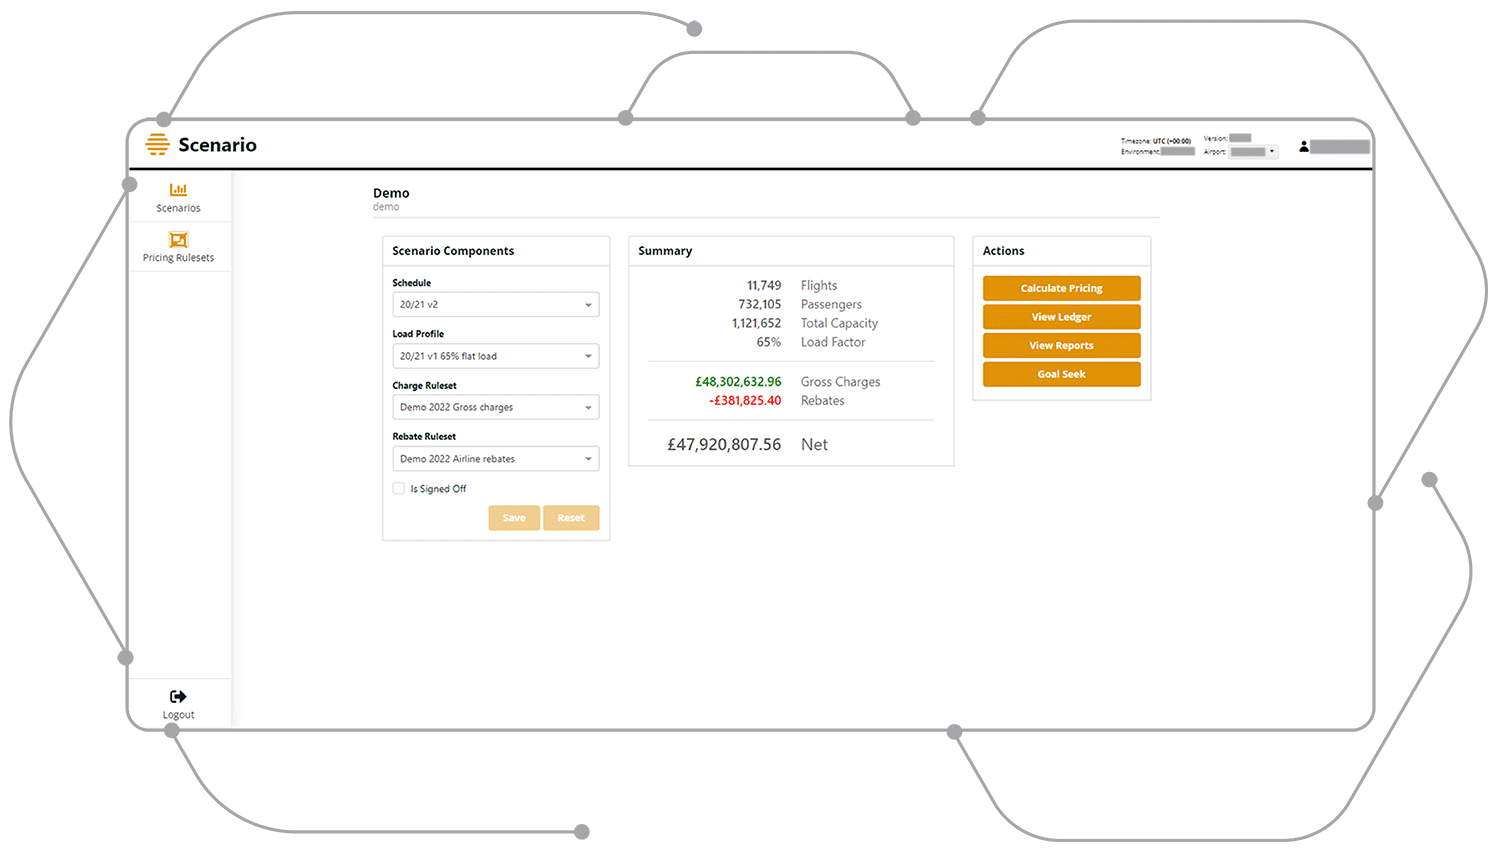 Screenshot from Azinq's Airport Hive AMS Product Forecasting showing its intuitive, clear interface.